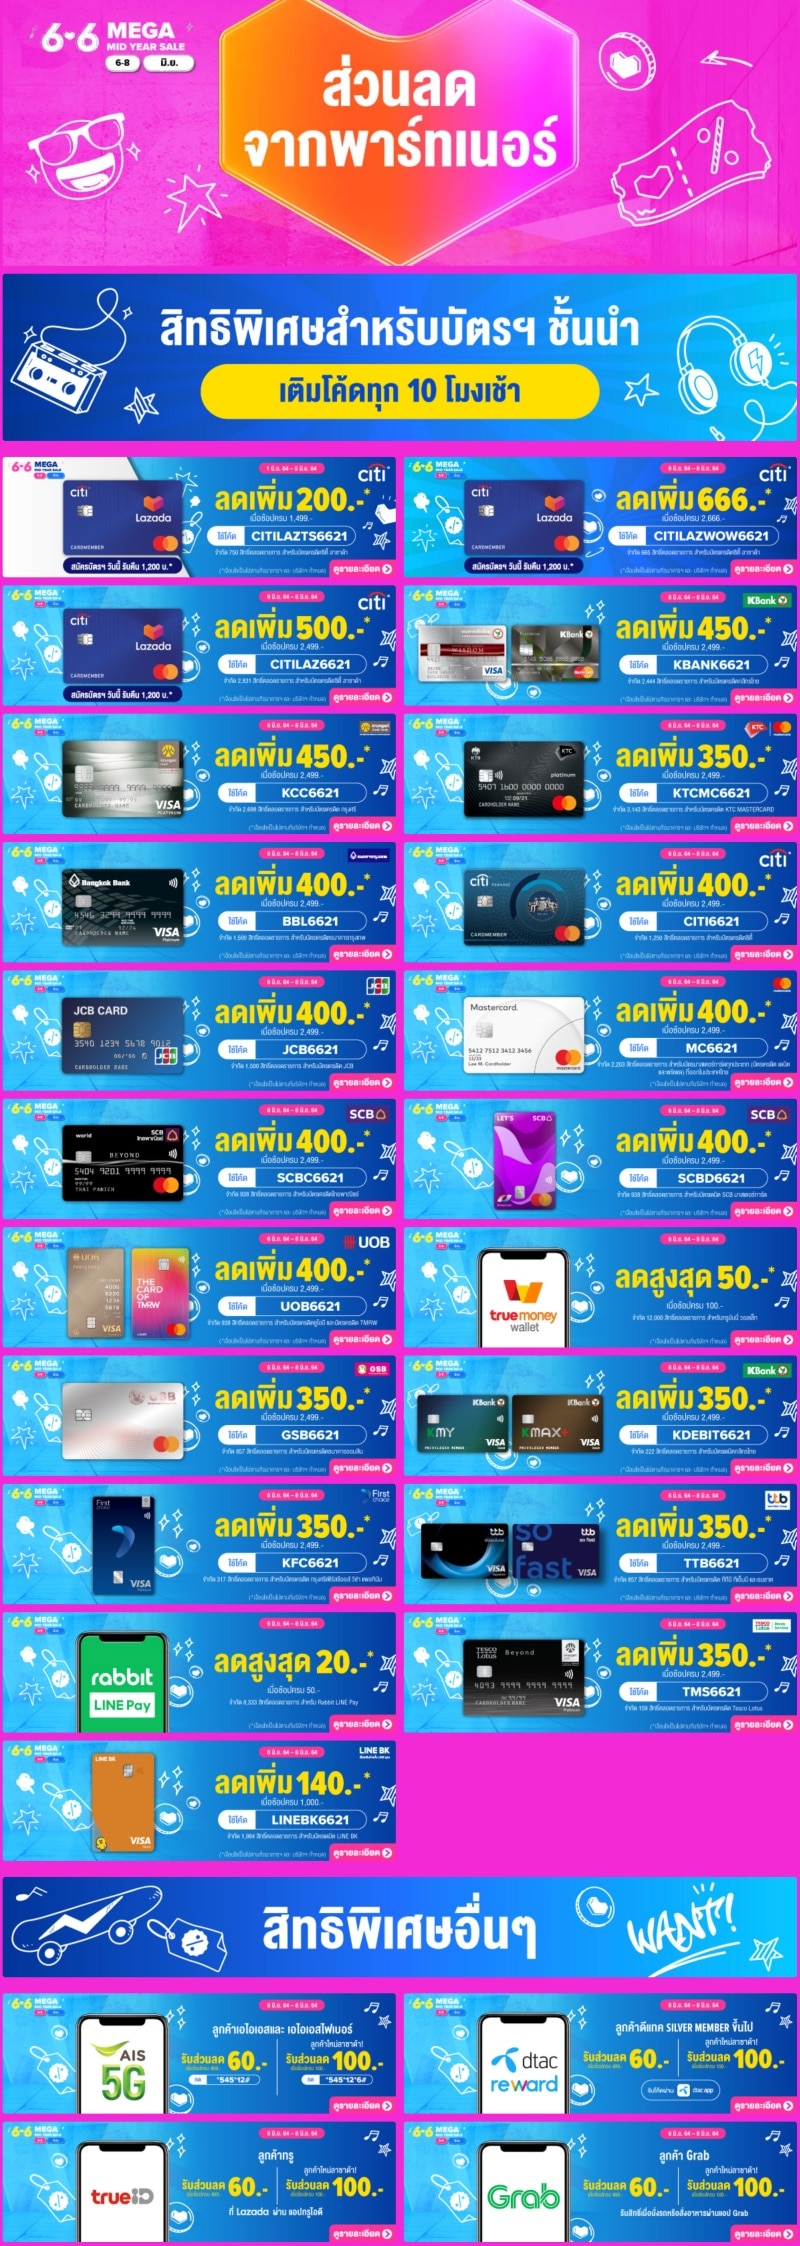 Lazada 6.6 Coupons and Promotions credit cards